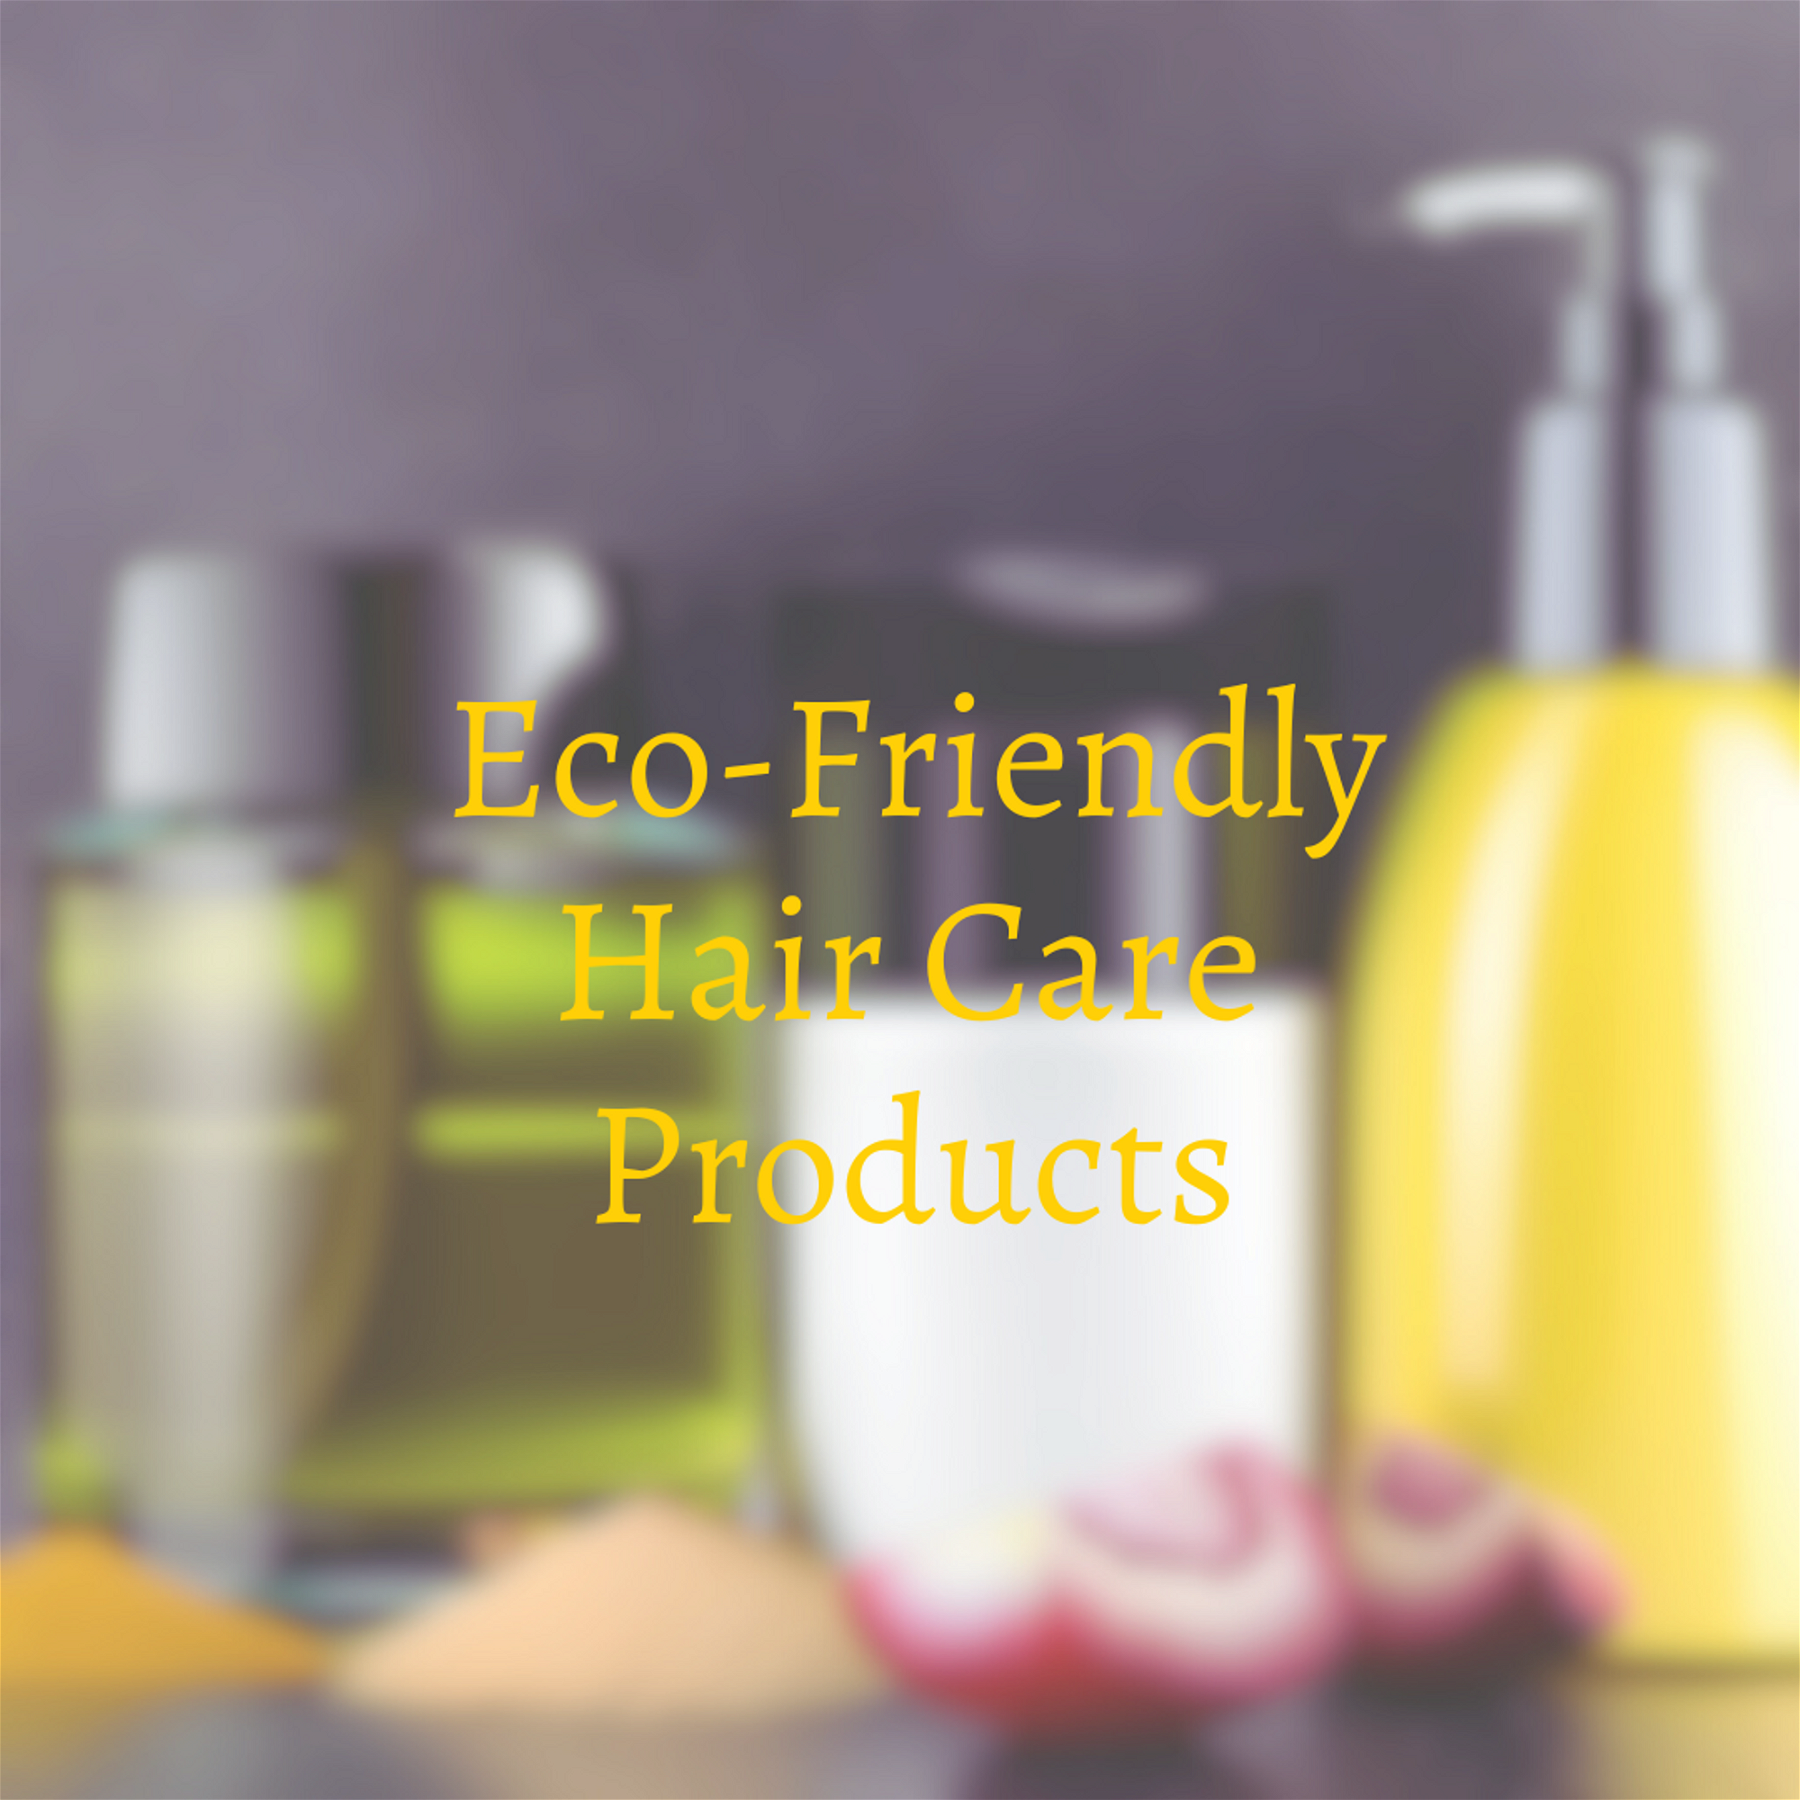 7 Sustainable Hair Care Products for an Eco-Friendly Hair Care Routine